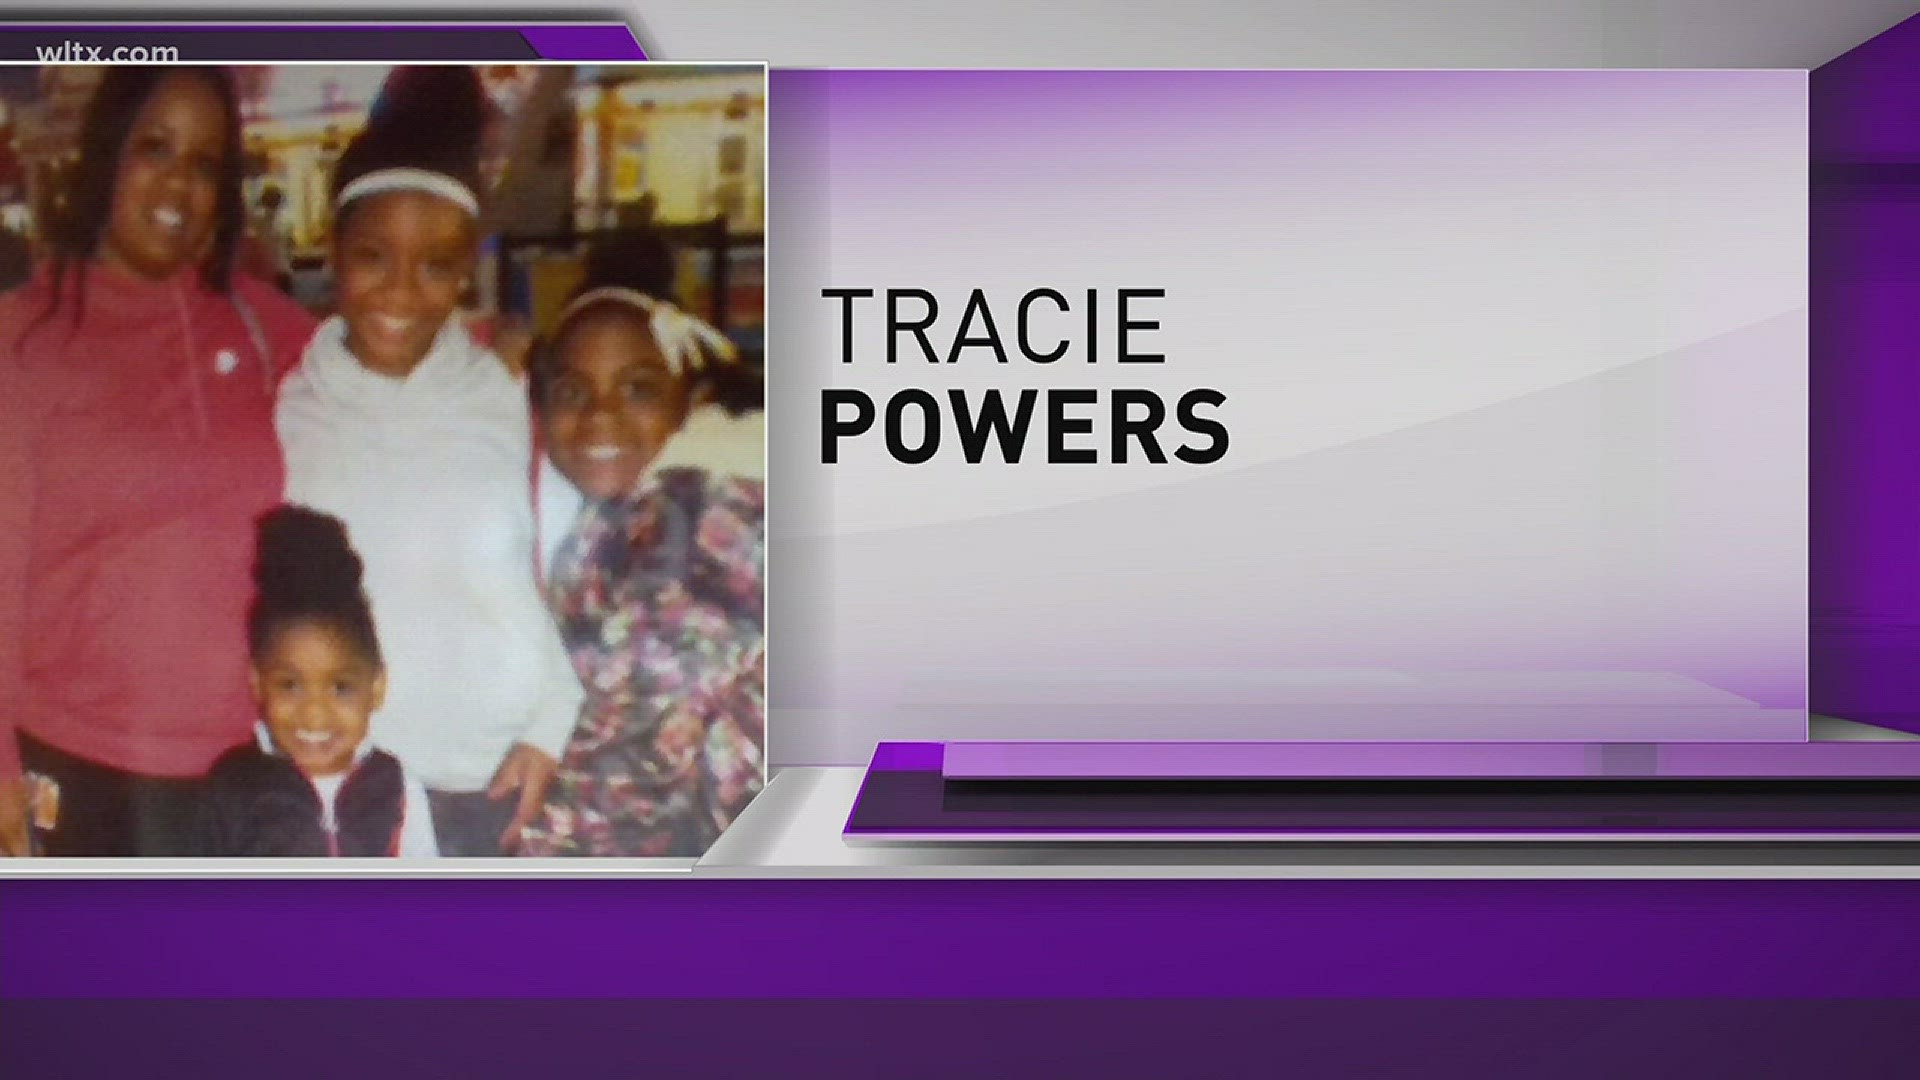 Congratulations to our Mom of the Day, Tracie Powers. Lorrene was nominated by her daughter India.